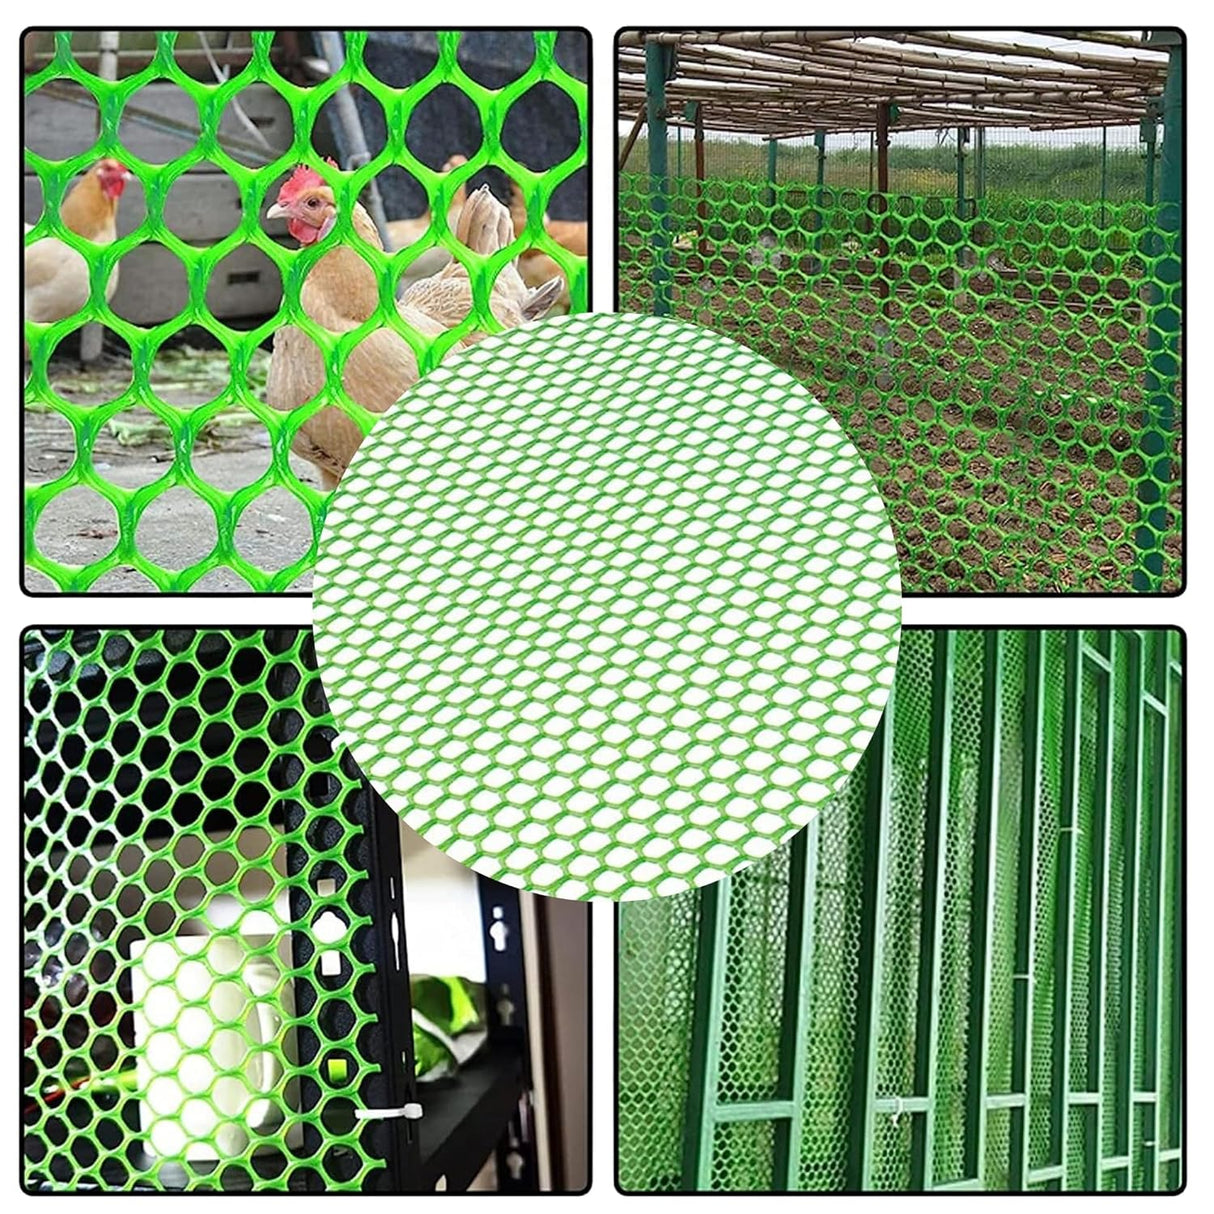 Singhal Tree Guard Net, Garden Fencing Net Virgin Plastic with 1 Cutter and 50 PVC Tags (Green, 4 ft x 5 ft)